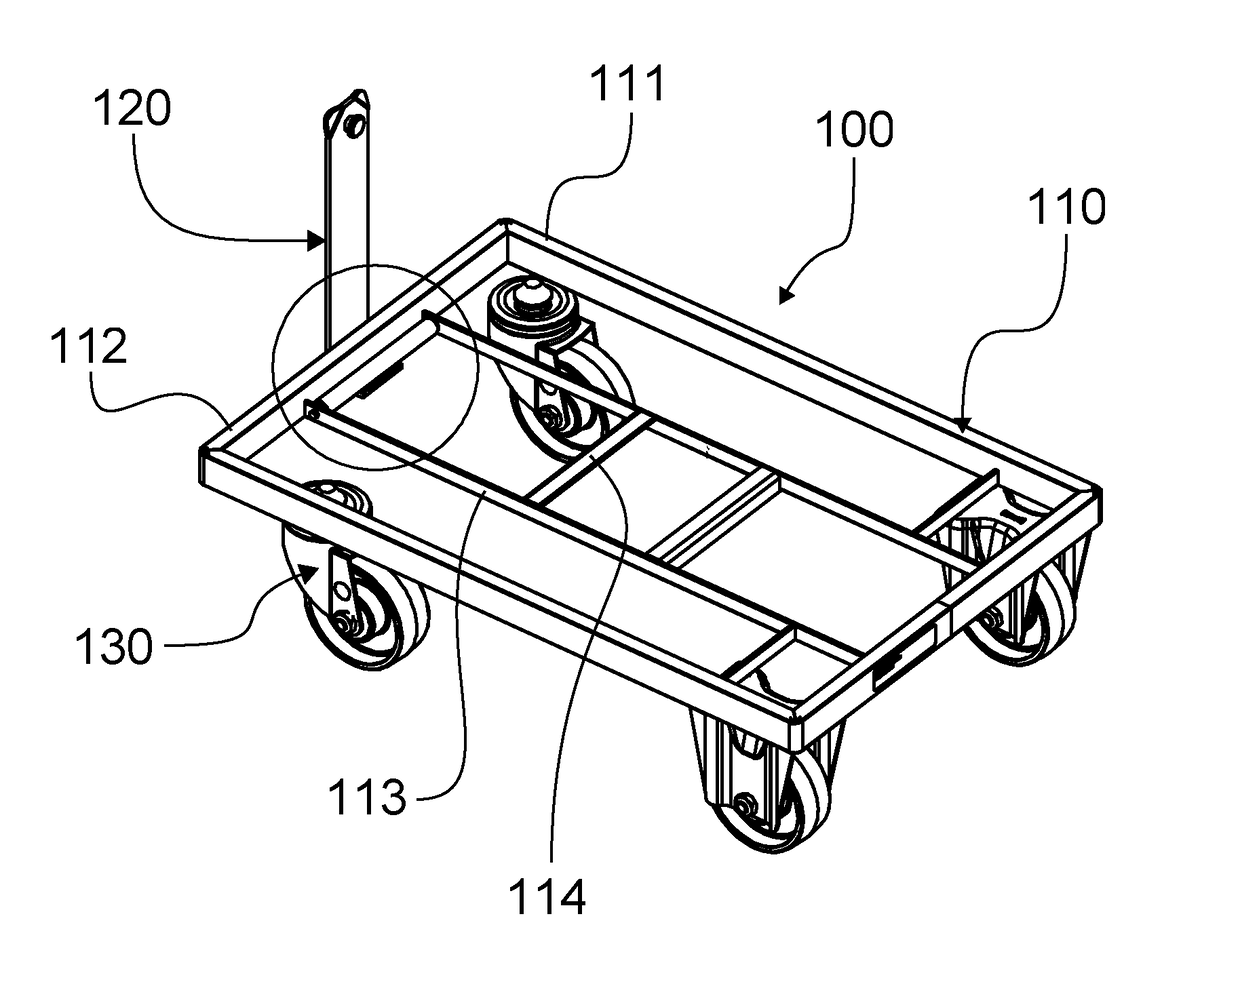 Tow Bar Assembly and Dolly Comprising the Same